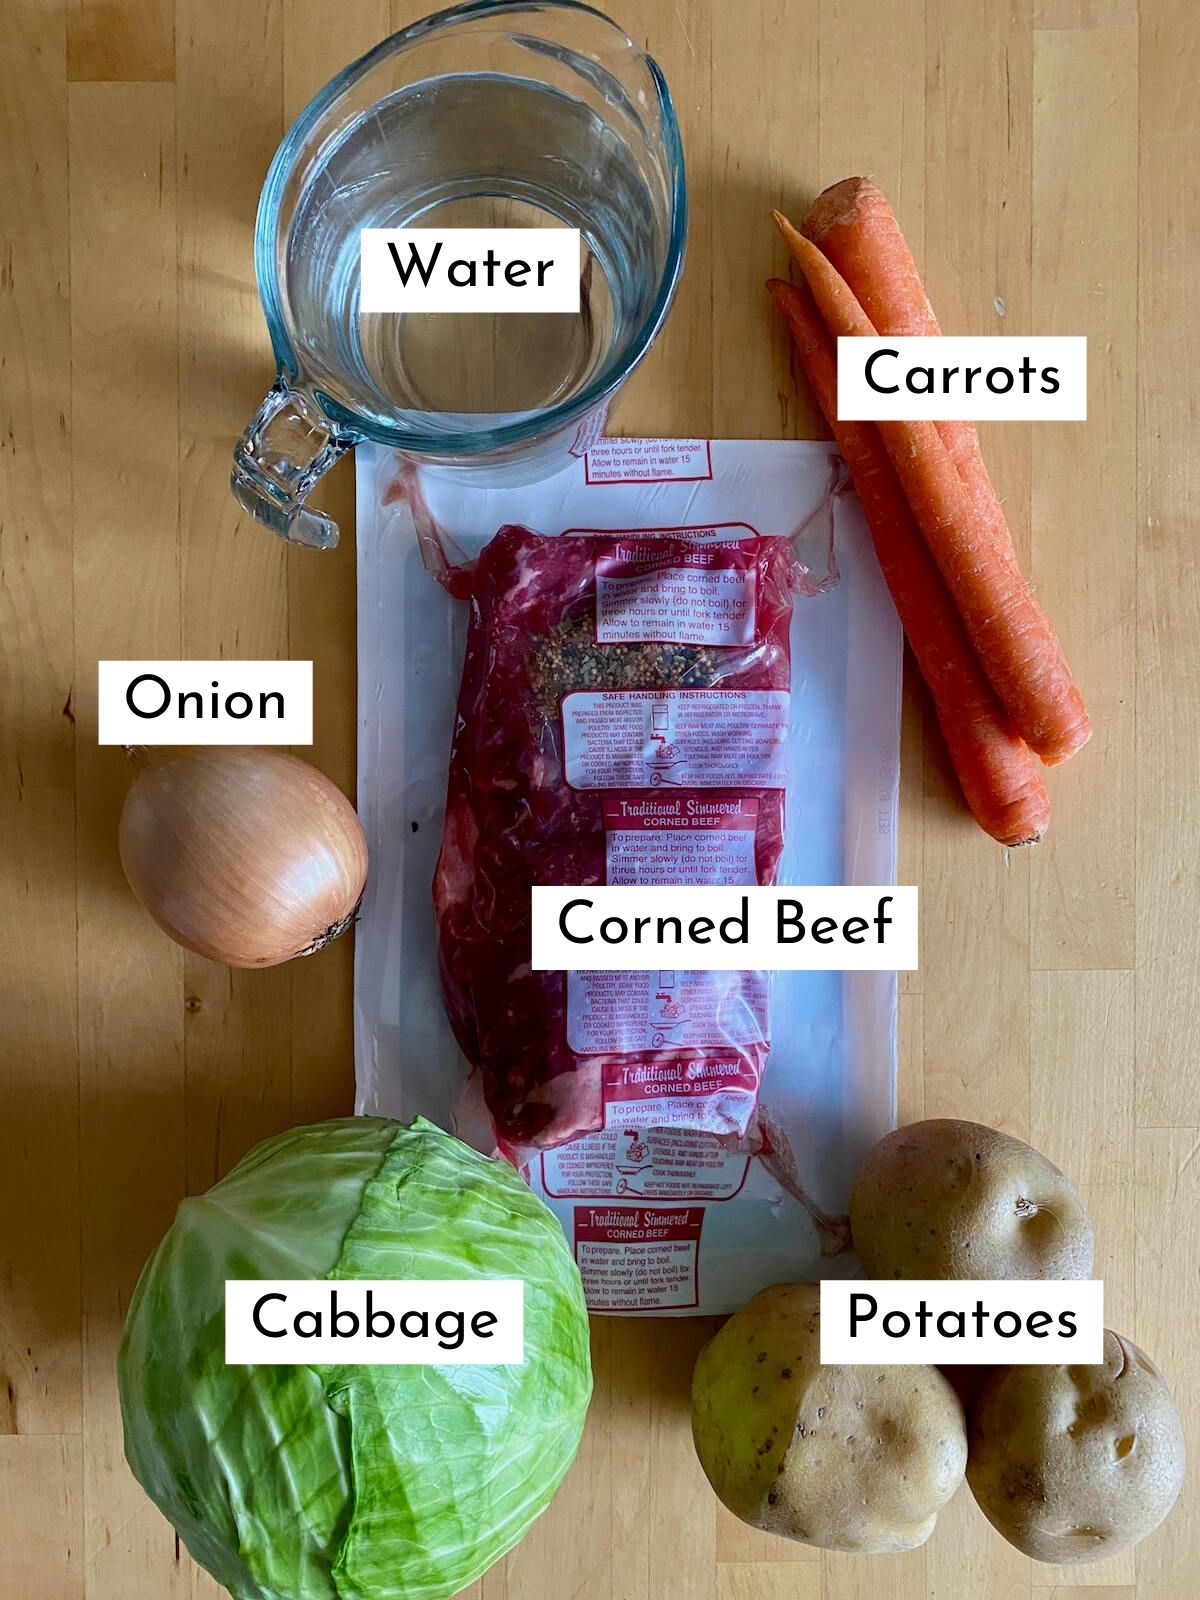 The ingredients to make Dutch oven corned beef and cabbage on a butcher block countertop. Each ingredient is labeled with text. Ingredients include corned beef, water, onion, carrots, cabbage, and potatoes.